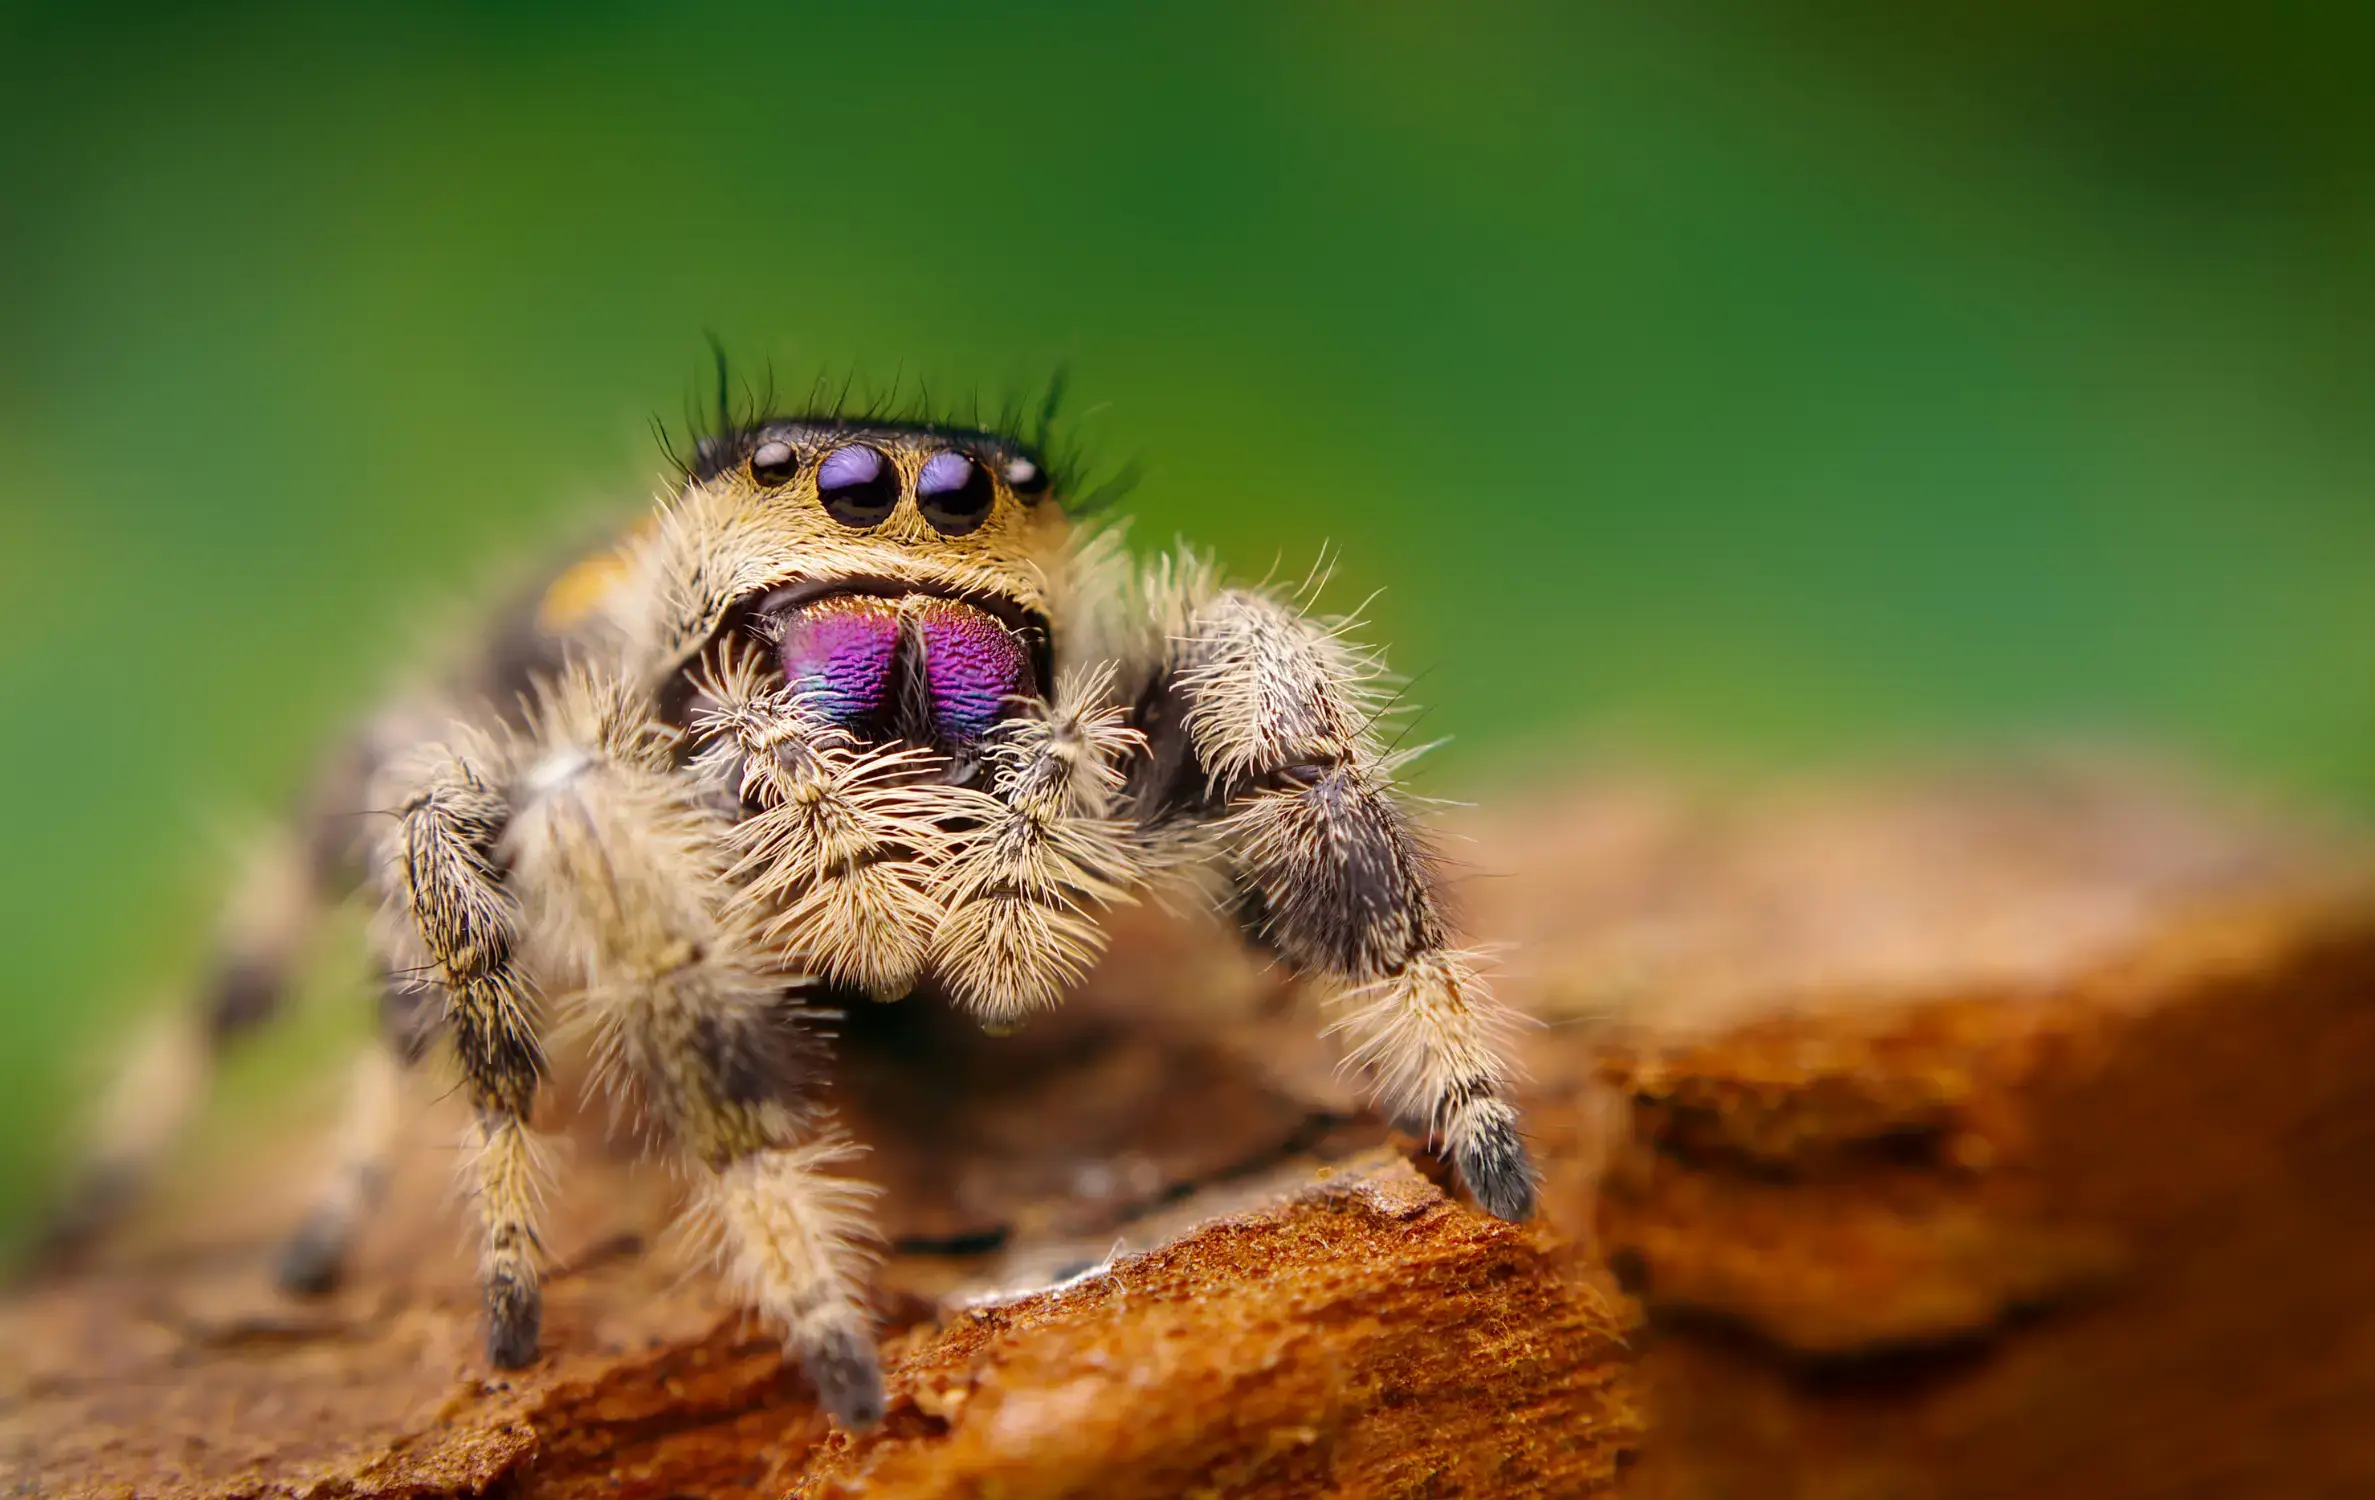 Jumping Spiders in Florida